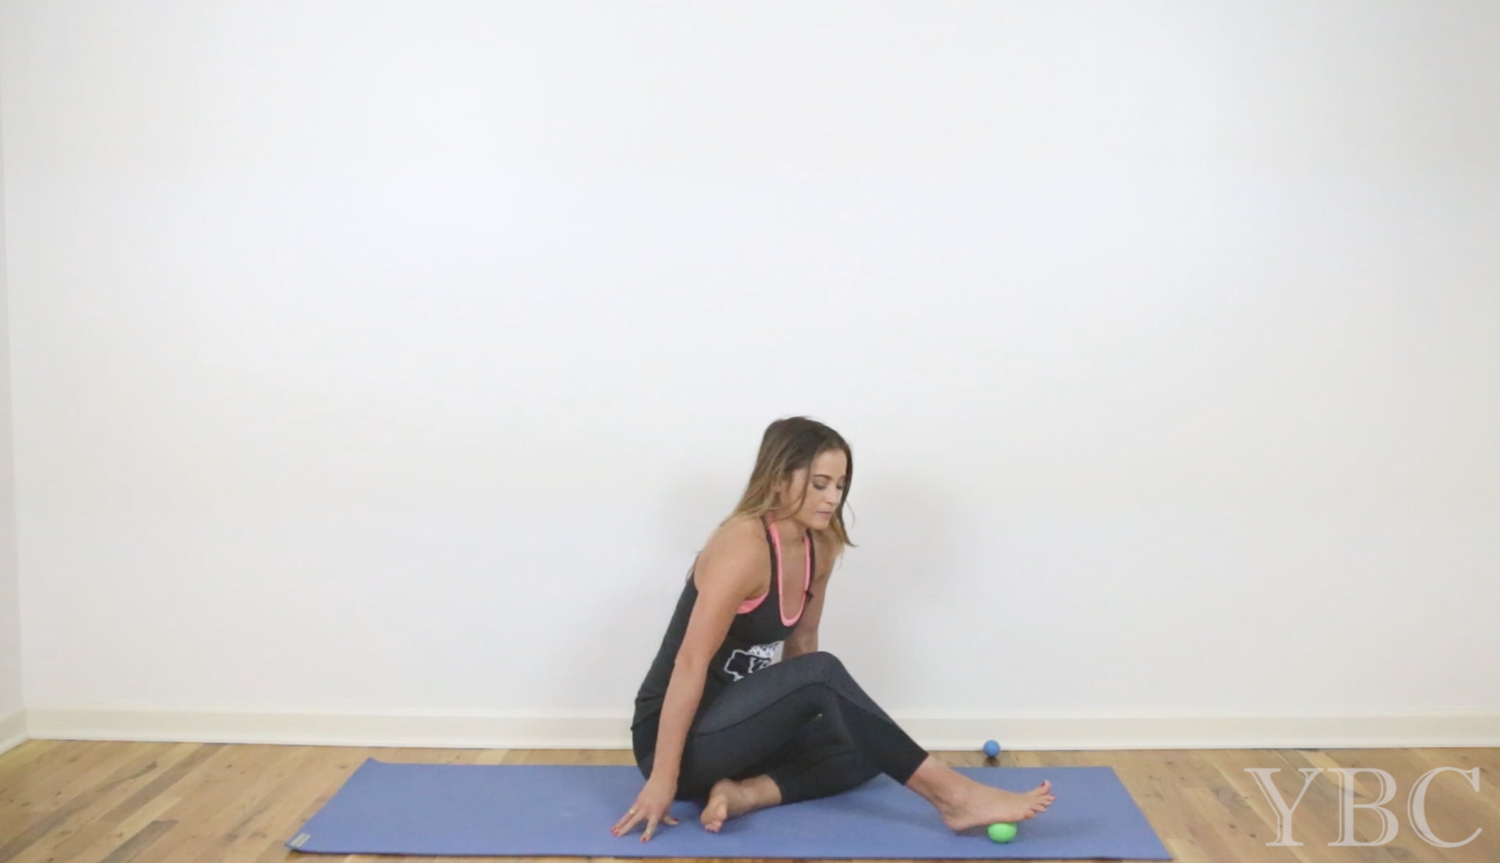 15 Minute Muscle Release Video — YOGABYCANDACE